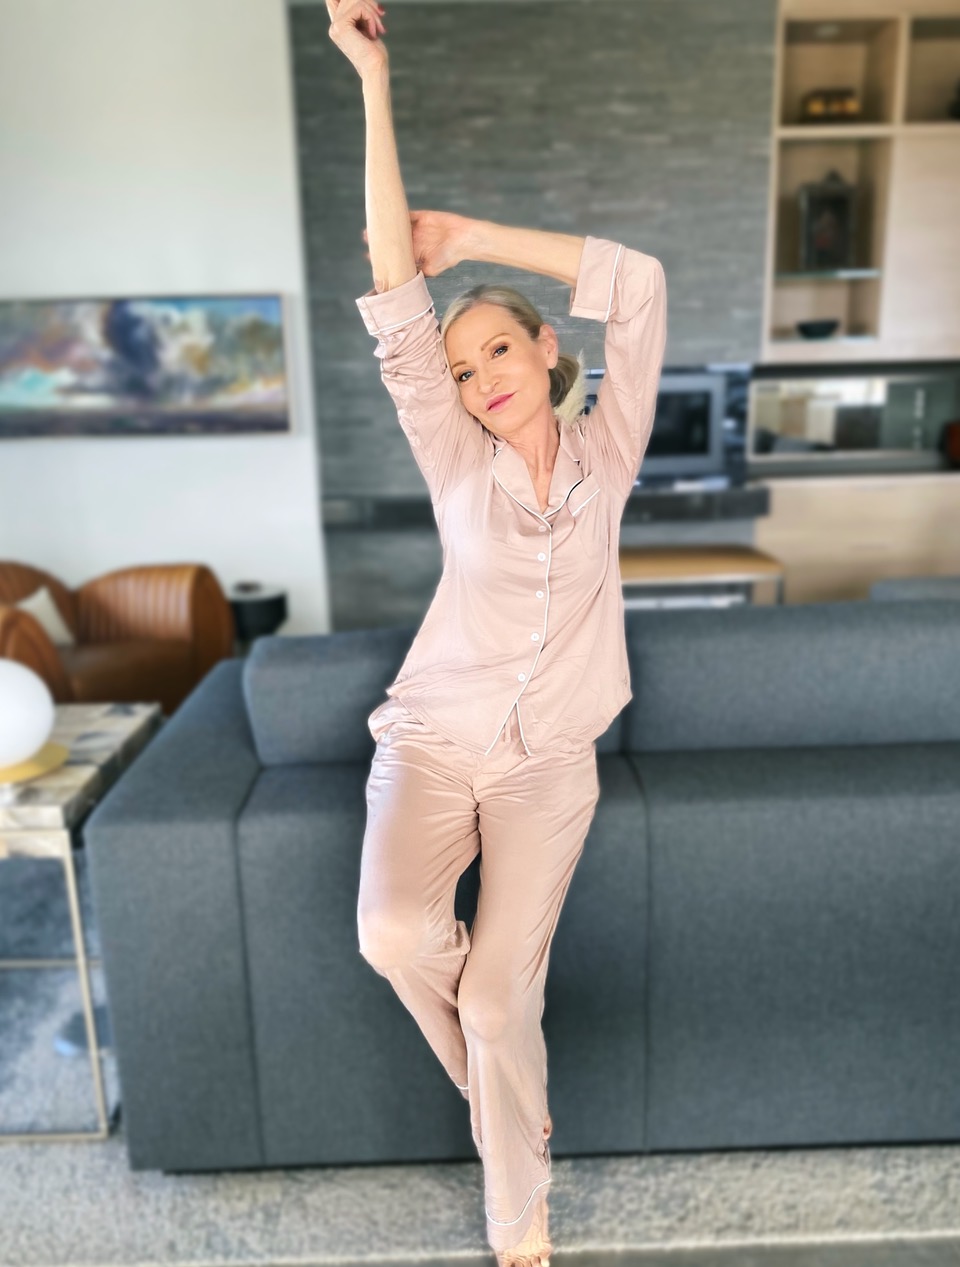 Lifestyle Influencer, jamie lewinger of More than turquoise, wearing knit bamboo PJ's from Cozy Earth